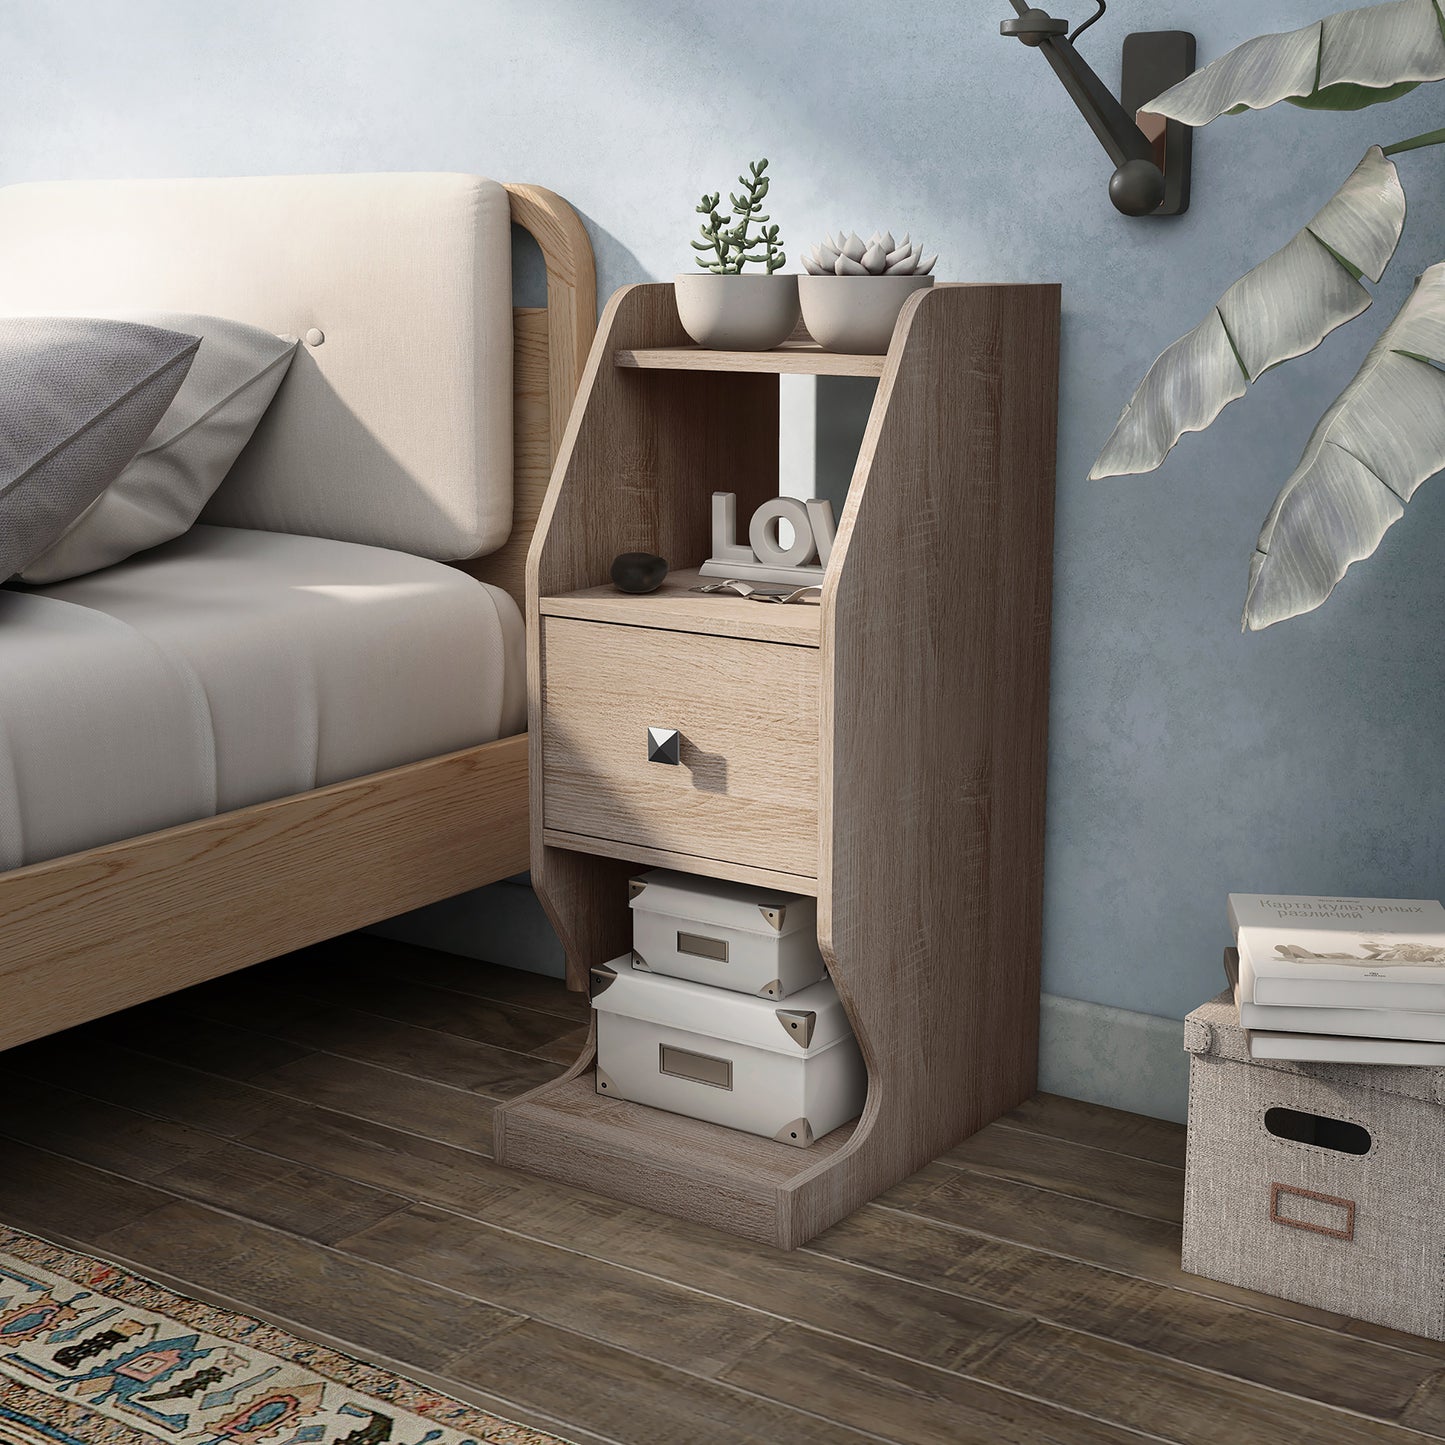 Left angled transitional natural oak tiered one-drawer nightstand in a bedroom with accessories